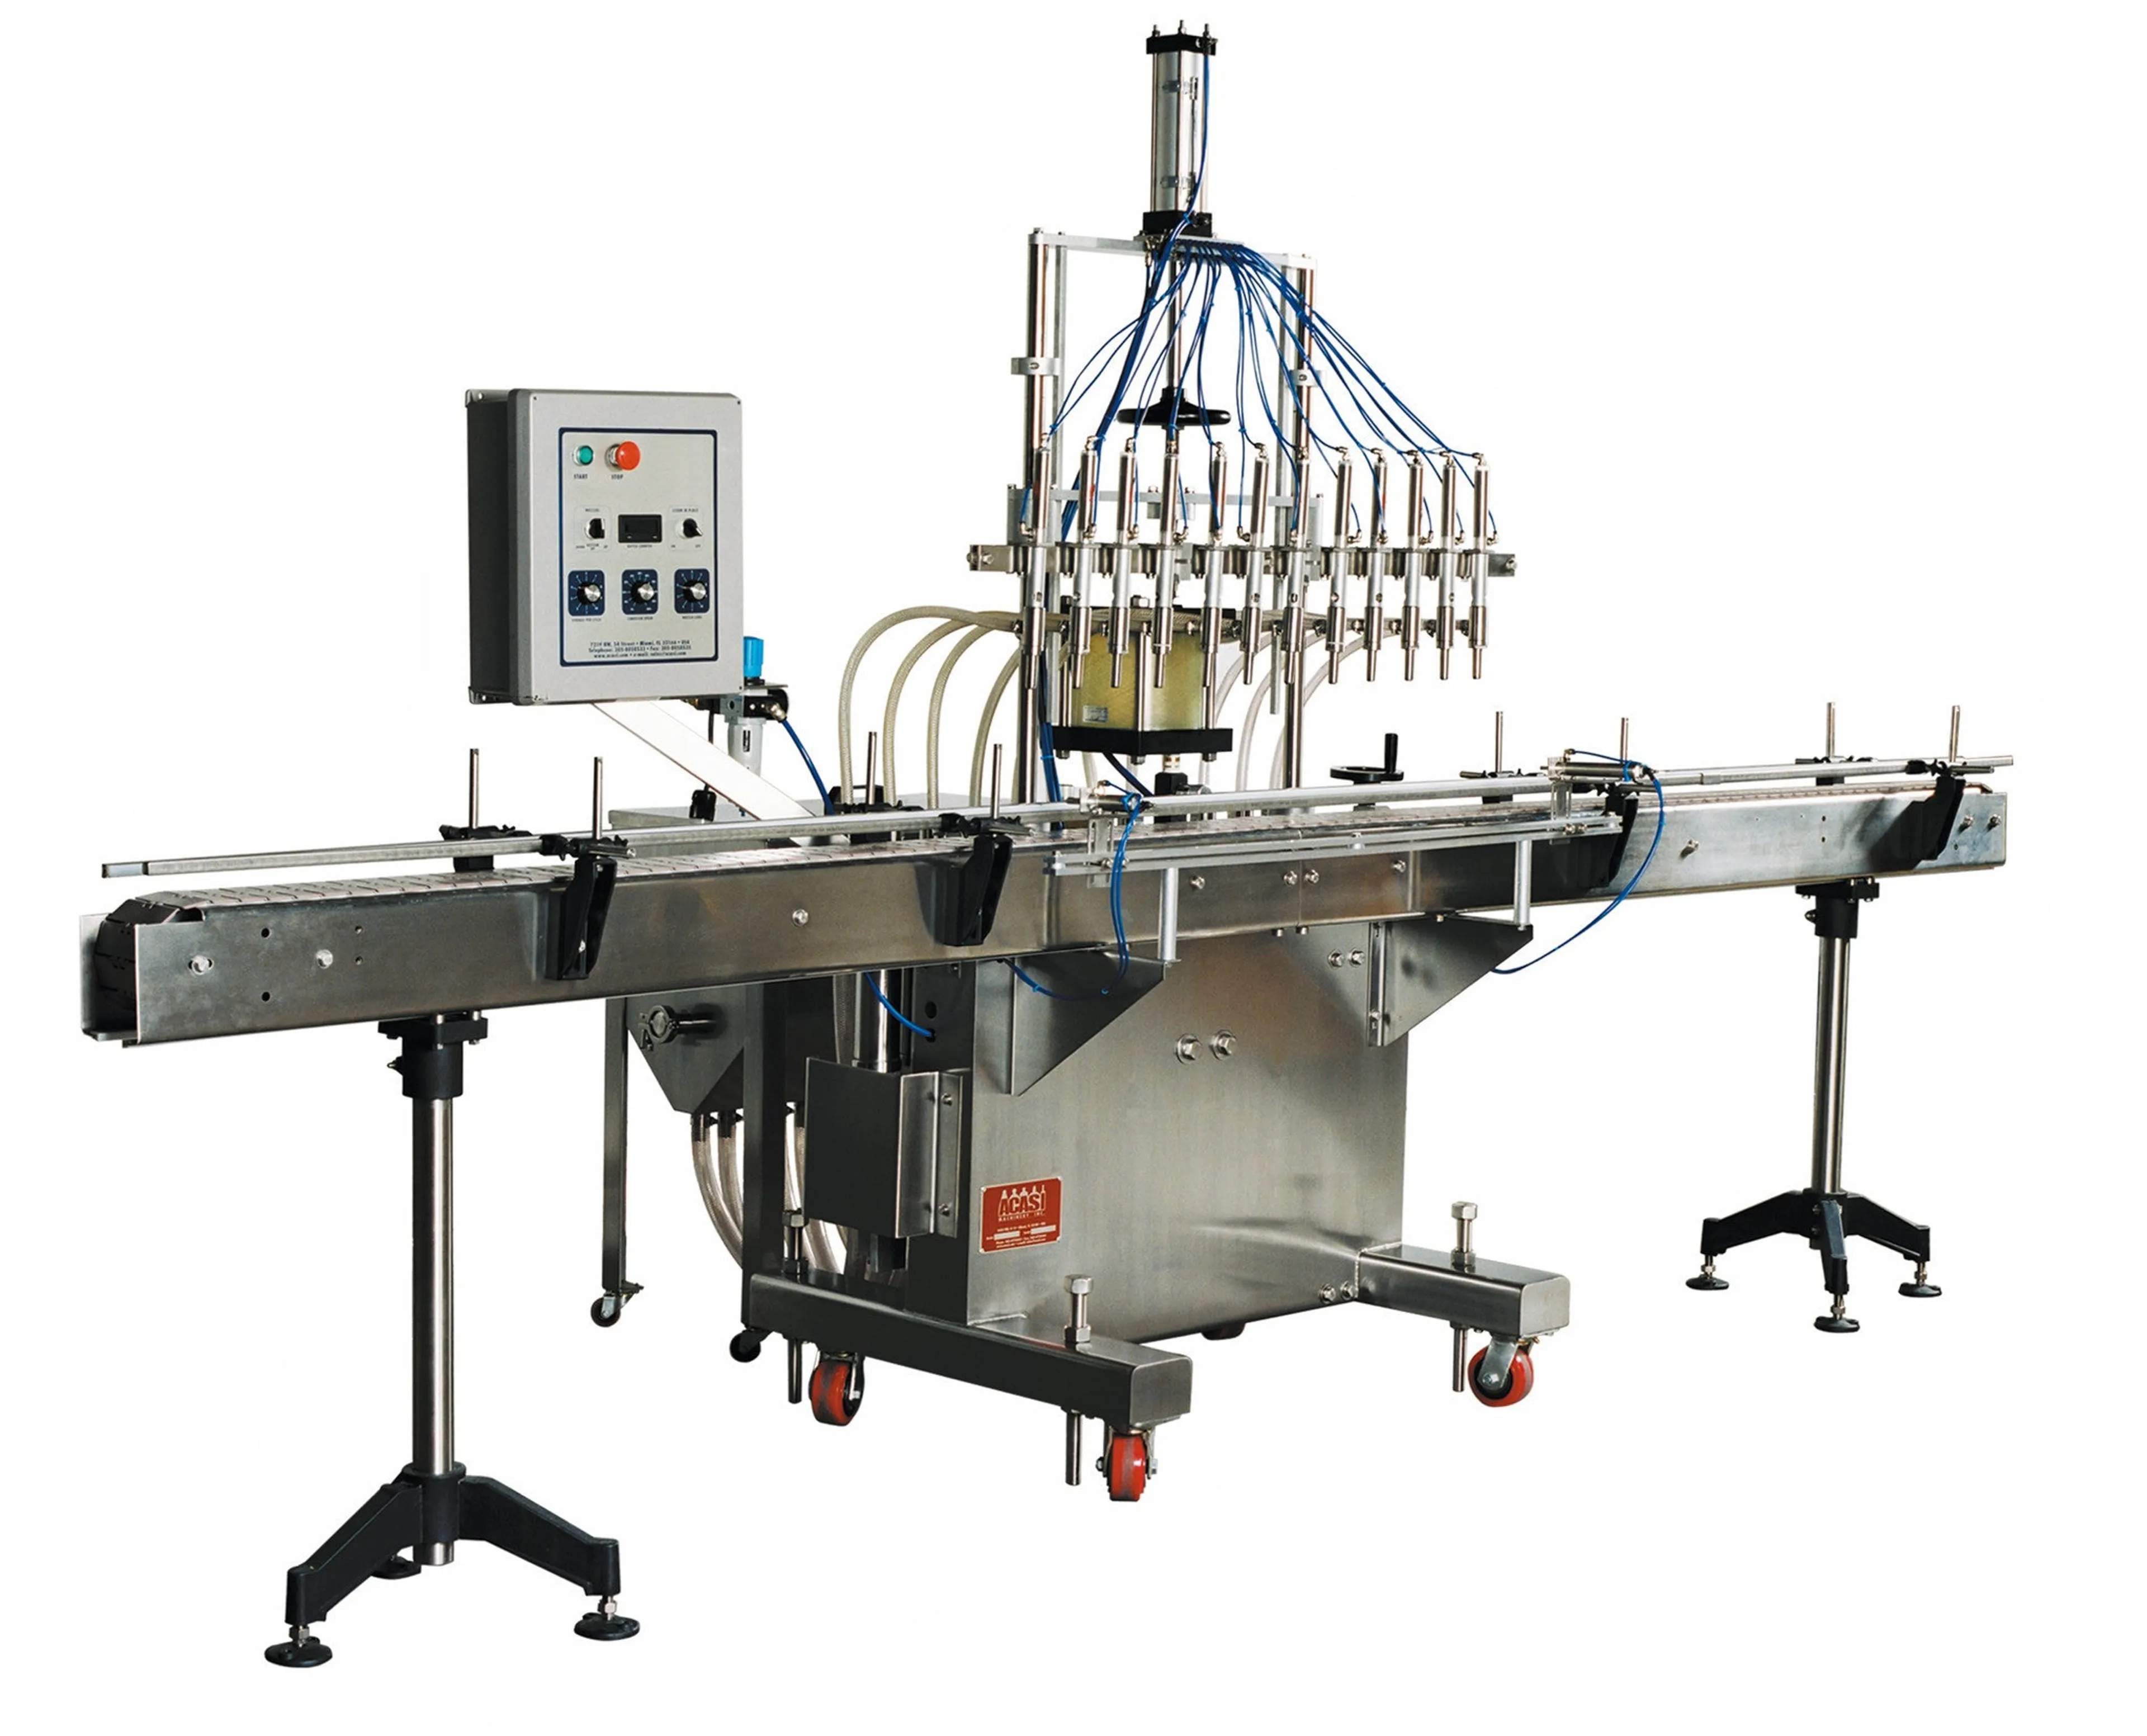 Automatic inline piston filler machine, high viscocity liquid products, 30 gallons tank, model PI3100, by Acasi Machinery Inc., left and front view.